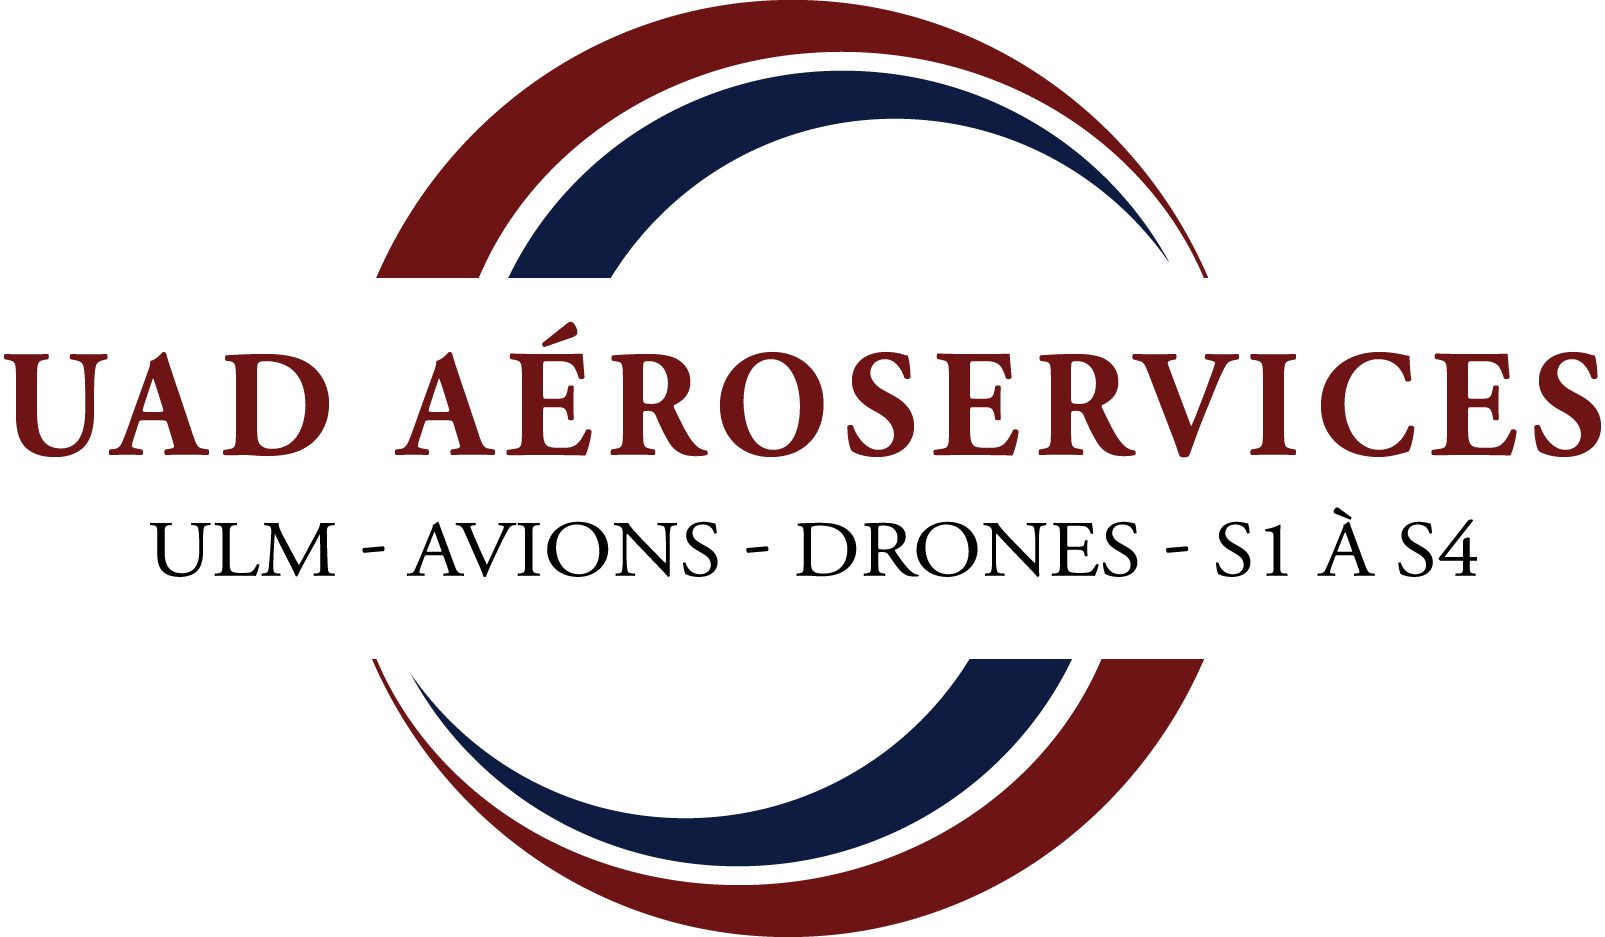 You are currently viewing UAD AEROSERVICES